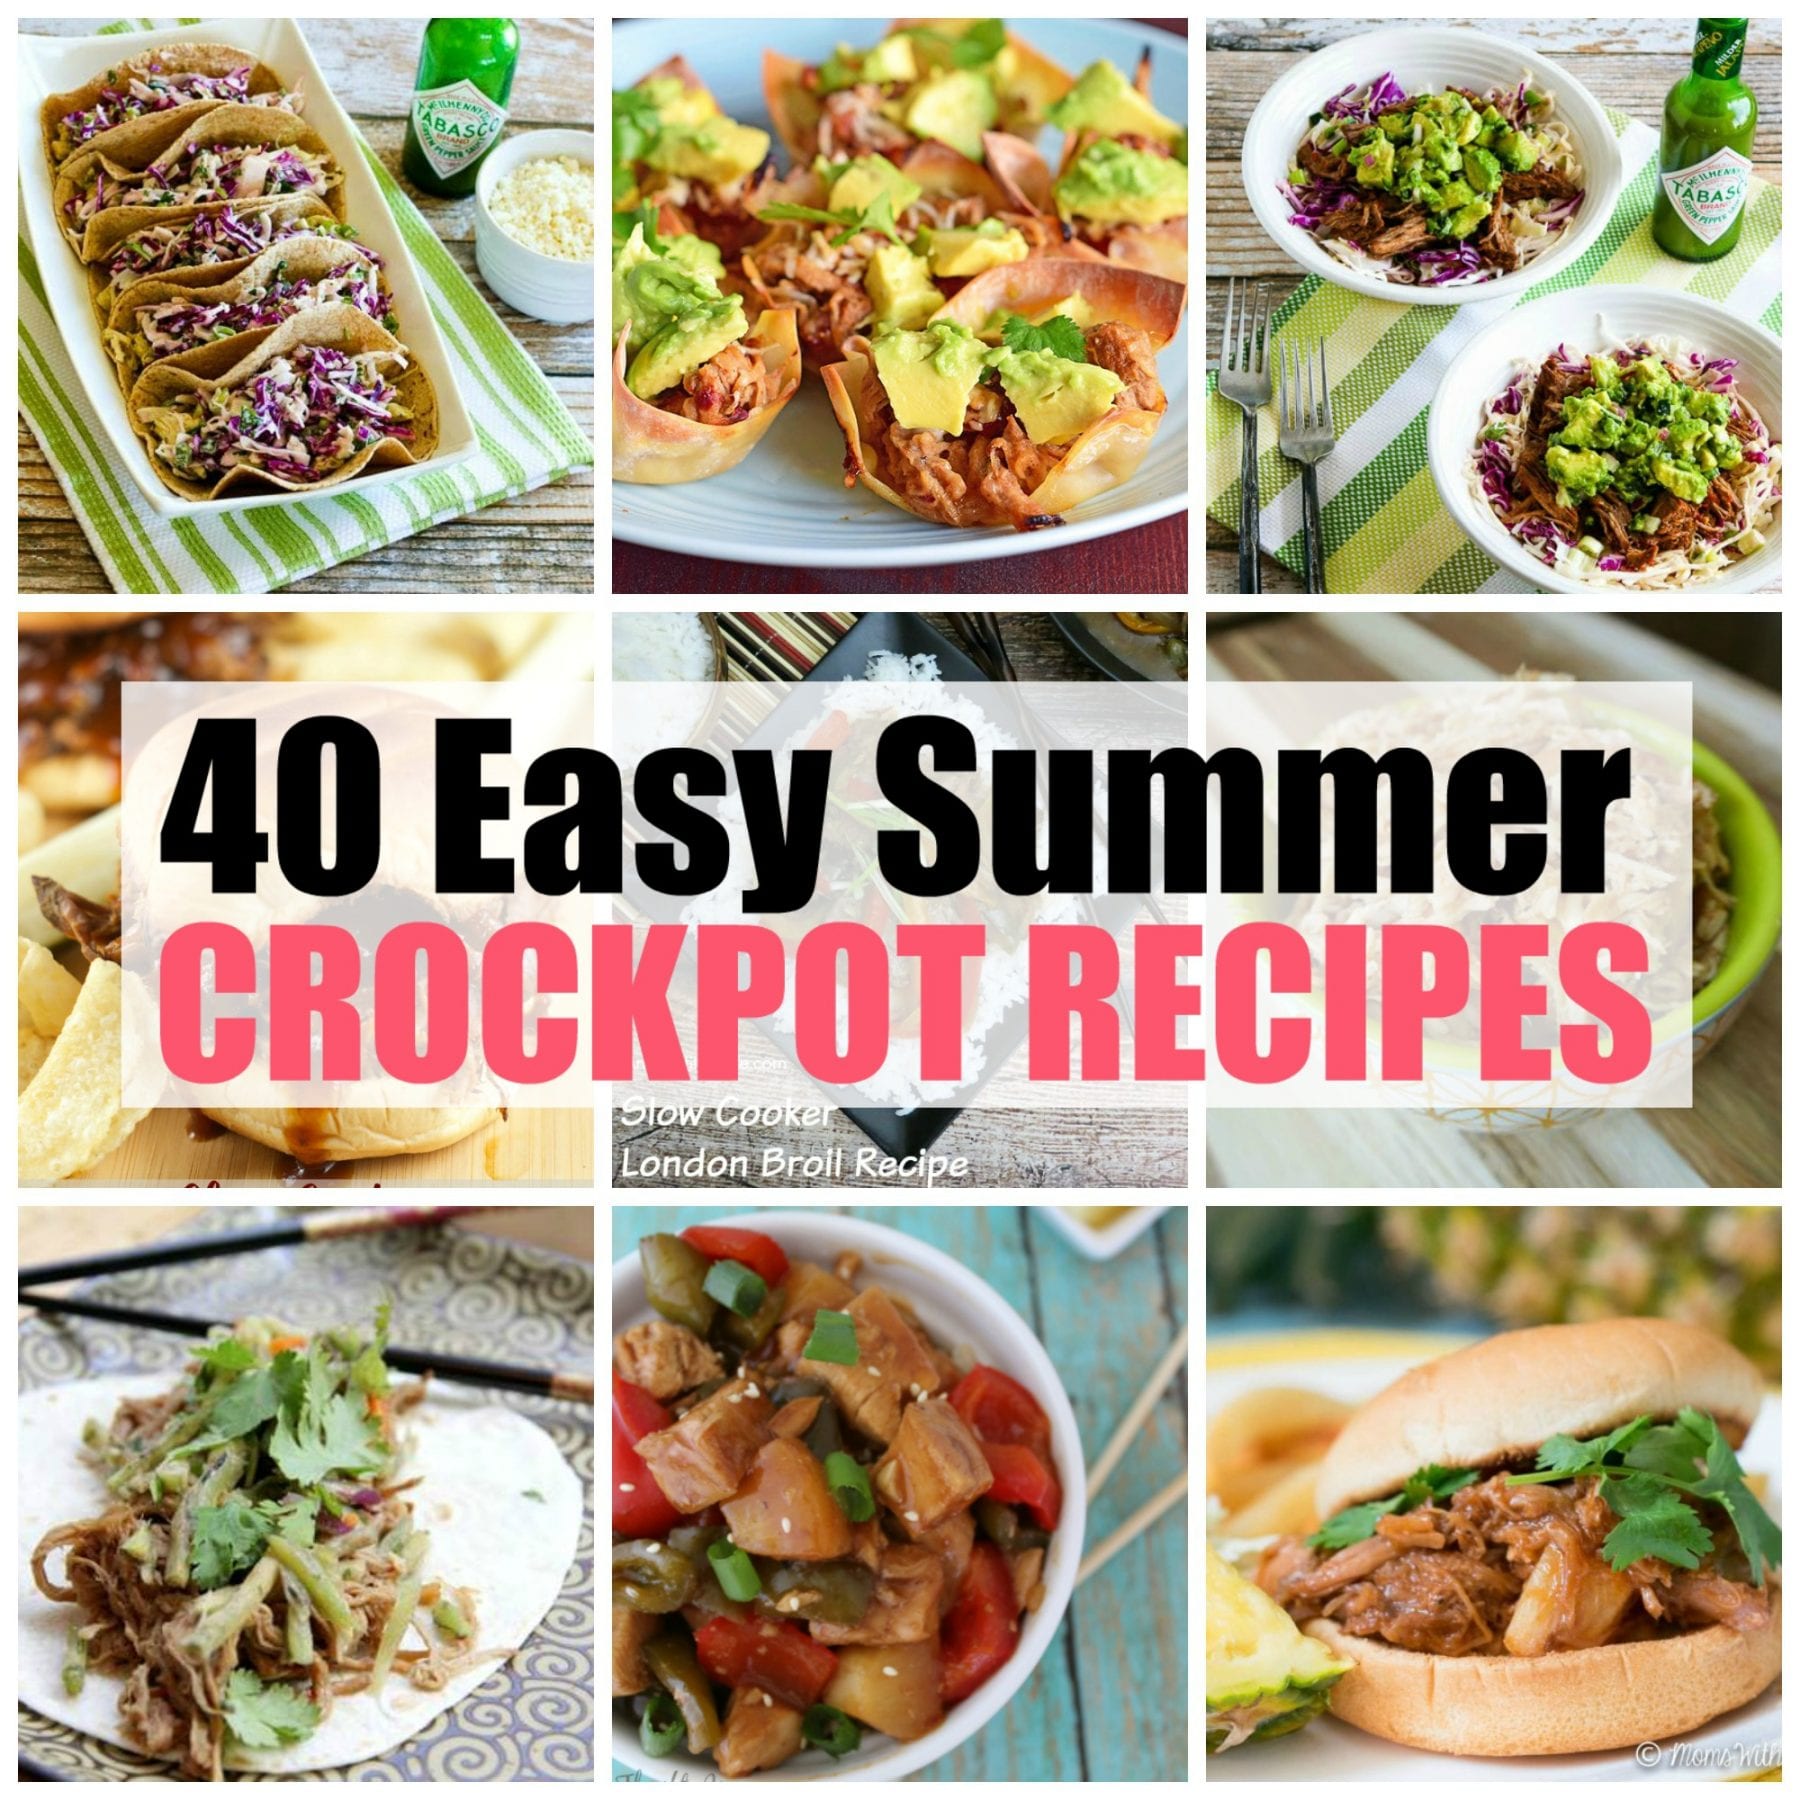 These easy summer crockpot recipes will keep you from slaving over a hot stove and will also free up your time to enjoy those lazy days of summer. From chicken and pork tacos to vegetarian dishes, there’s a little something for everyone. All of these recipes are full meals, making dinners this summer a breeze. Click through to see all 40 recipes and start planning those summer meals!